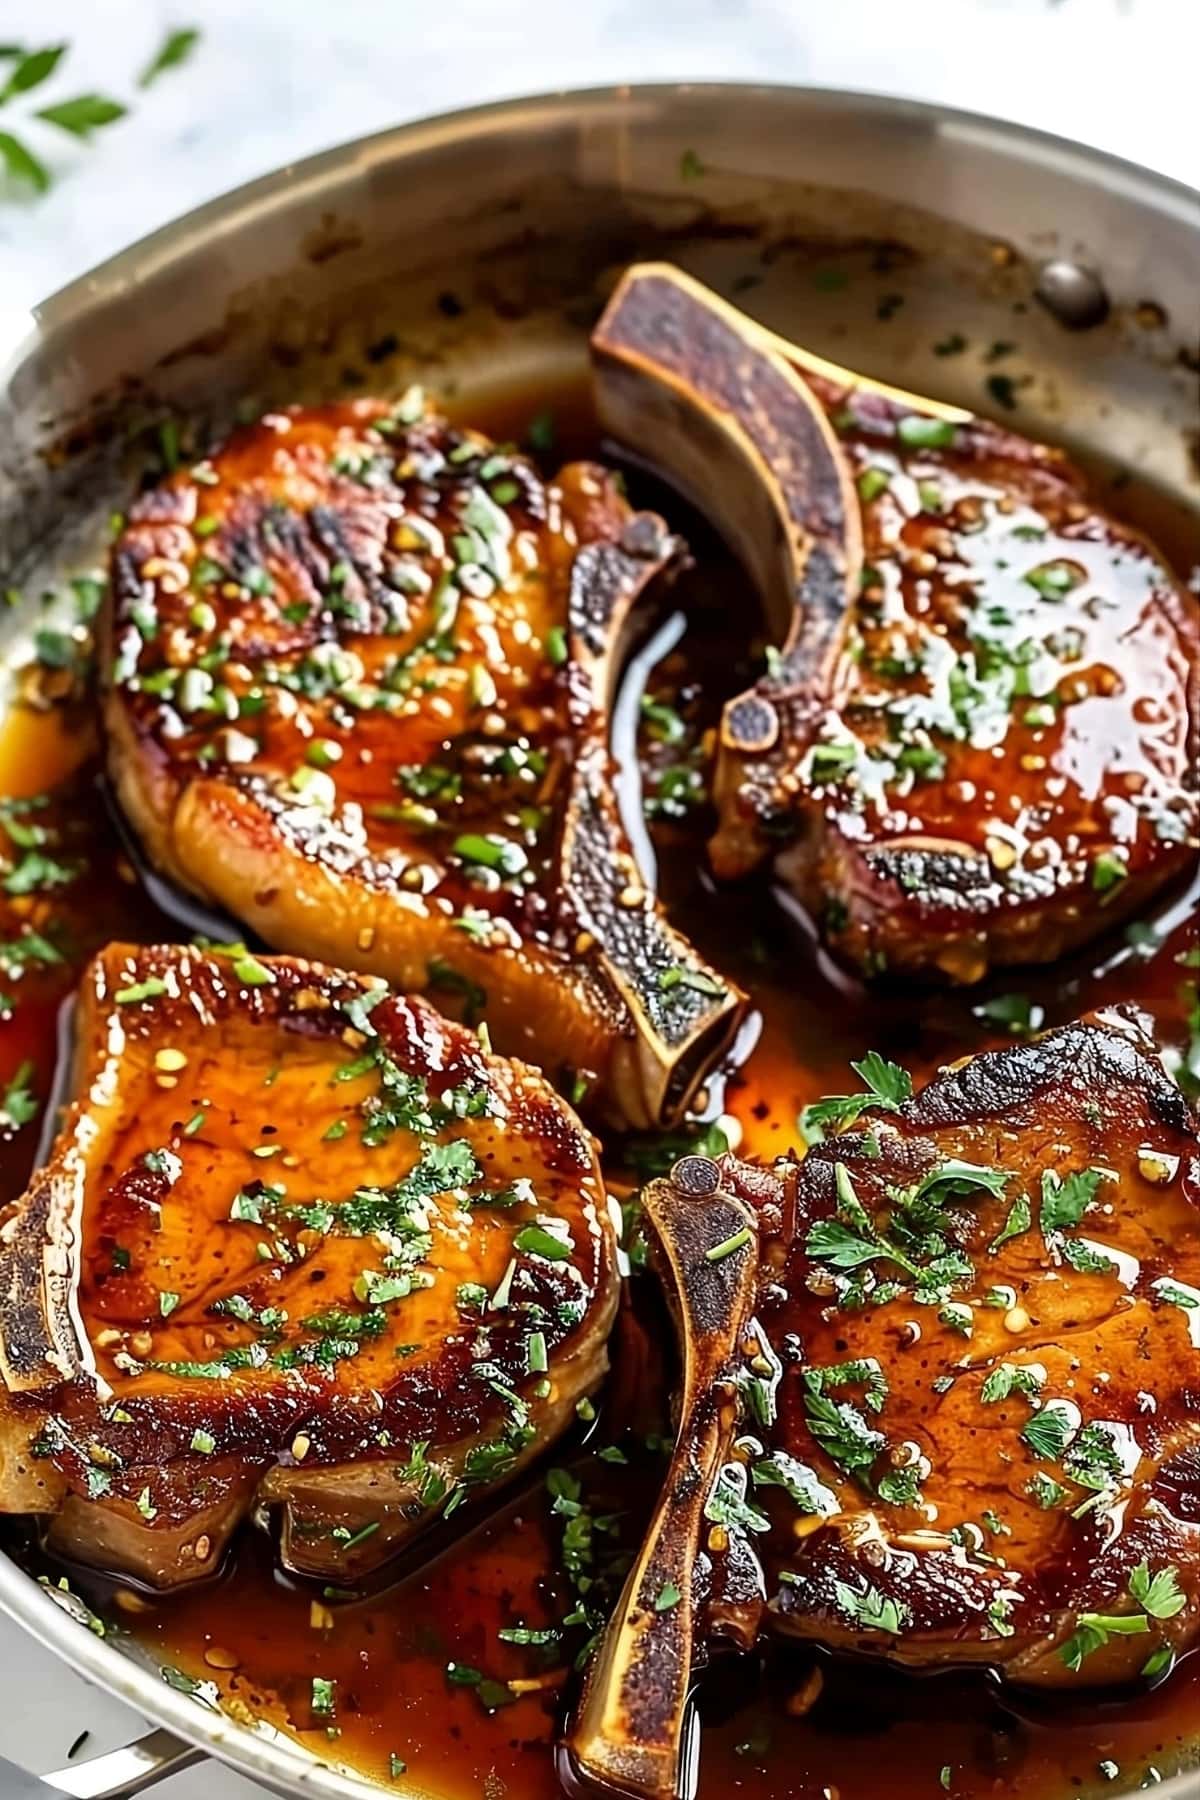 Pork chops in a skillet with glazing sauce.